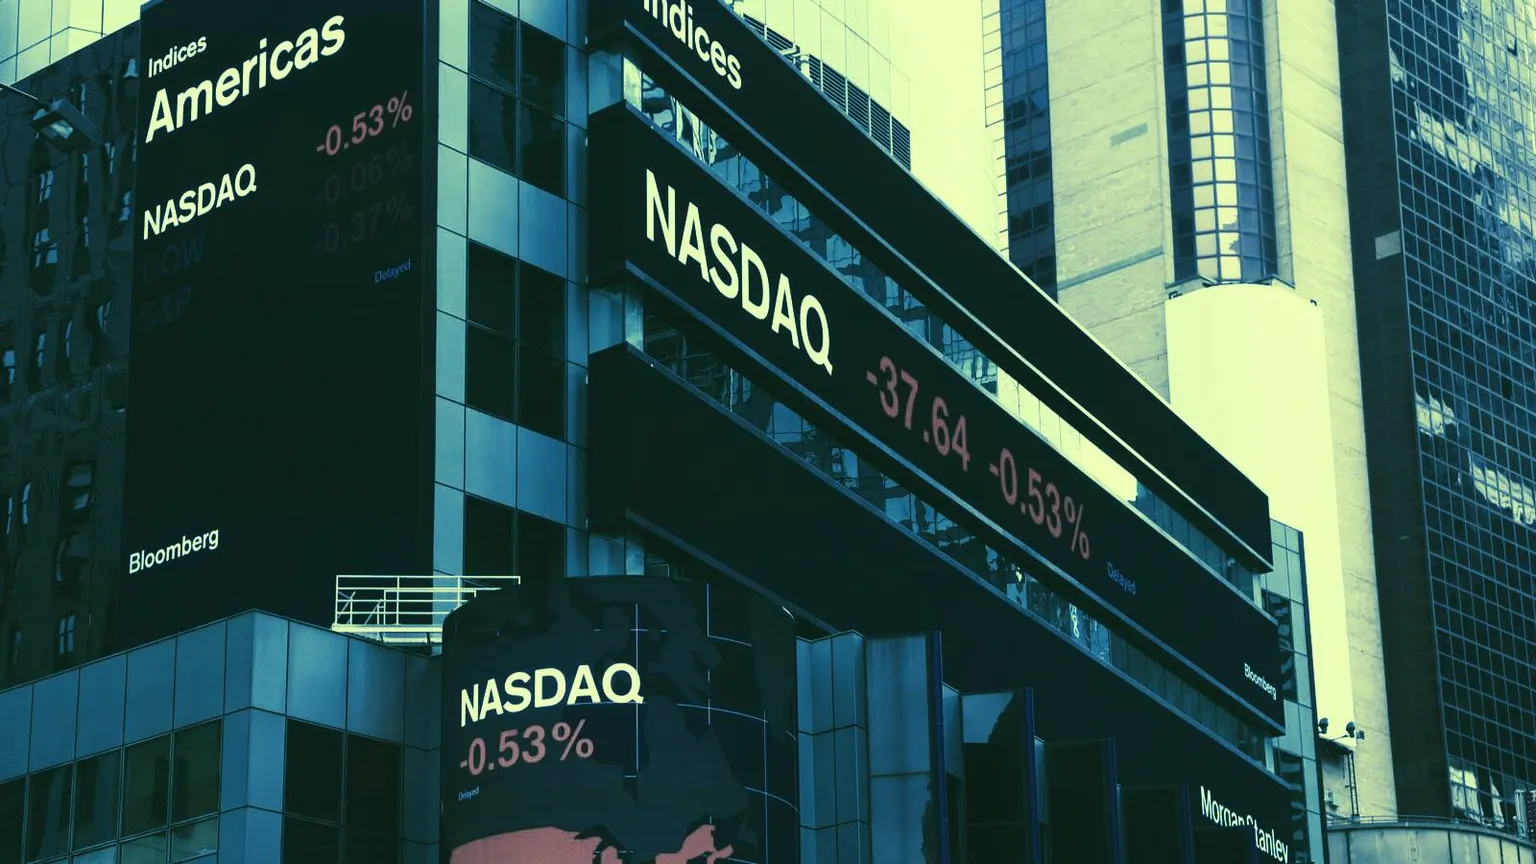 Nasdaq partners with R3 to aid financial companies. Image: Shutterstock